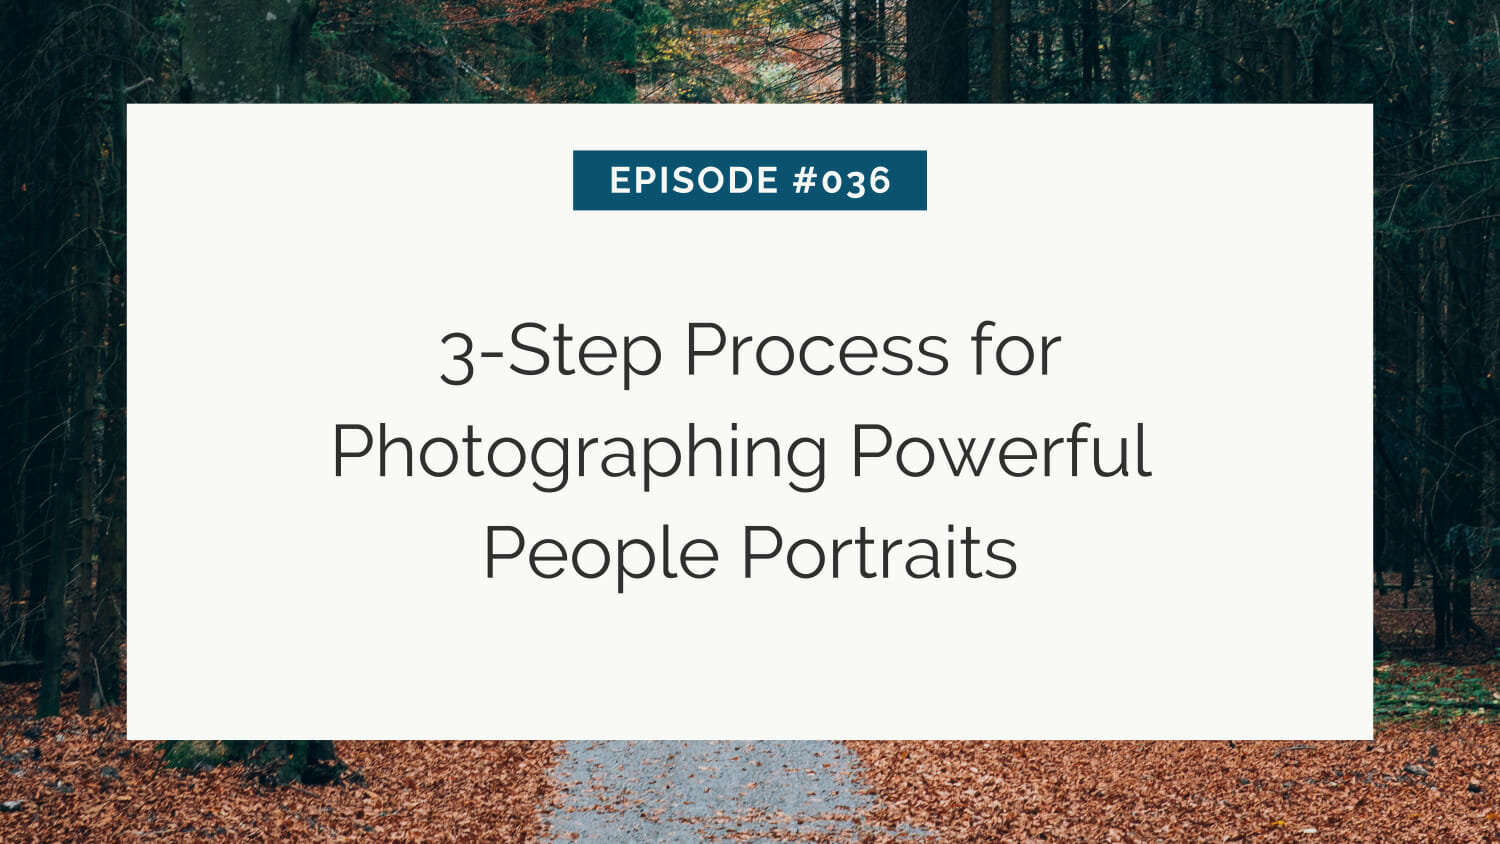 Slide presenting "episode #036: 3-step process for photographing powerful people portraits" against a backdrop of a forest path.